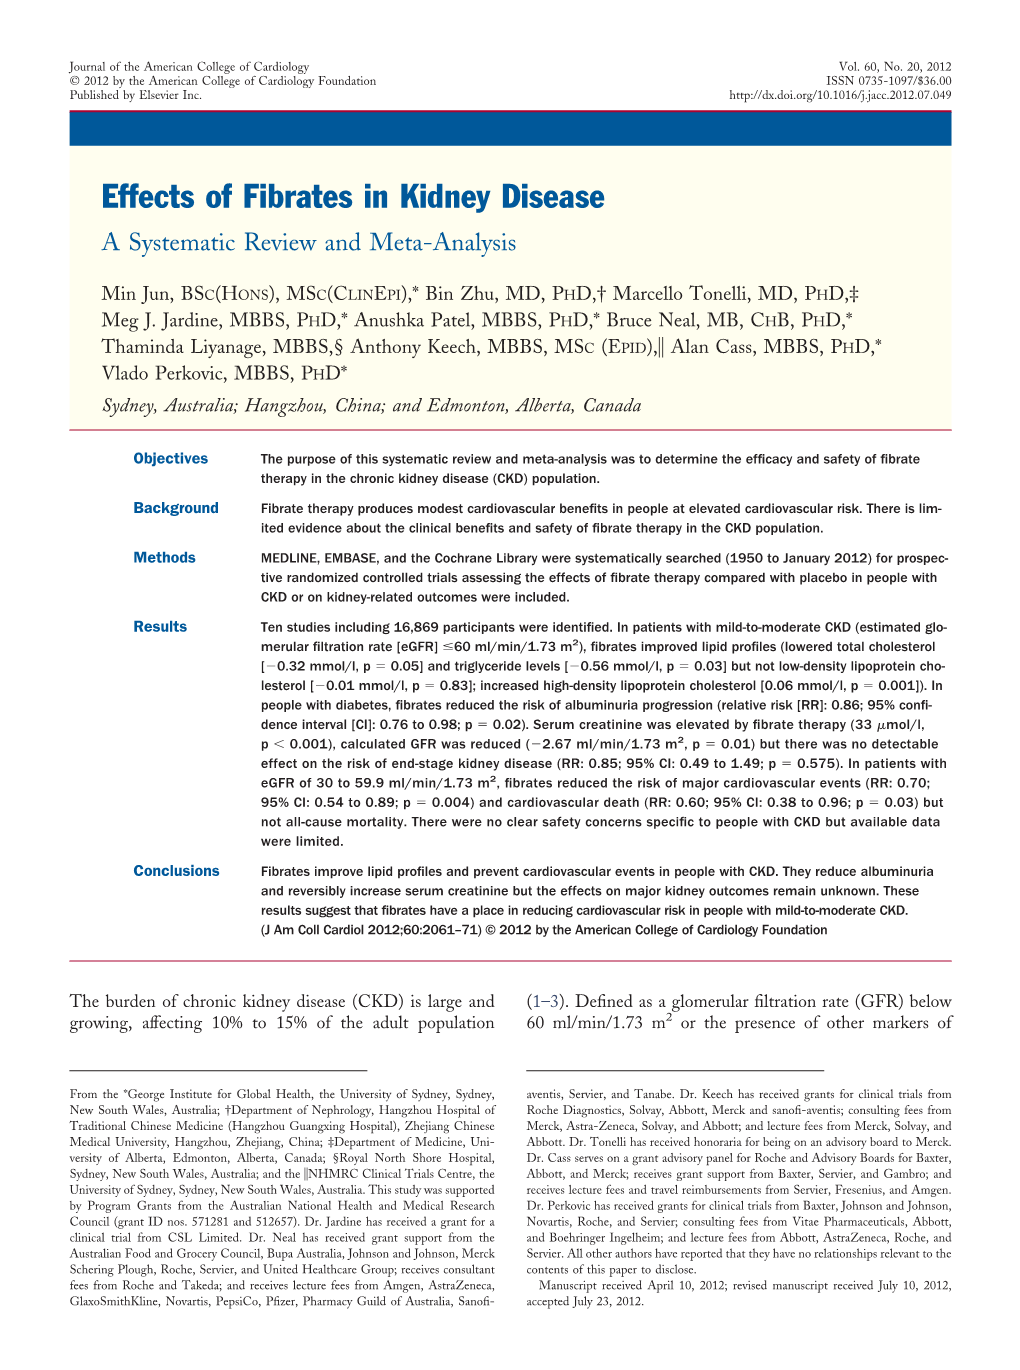 Effects of Fibrates in Kidney Disease a Systematic Review and Meta-Analysis